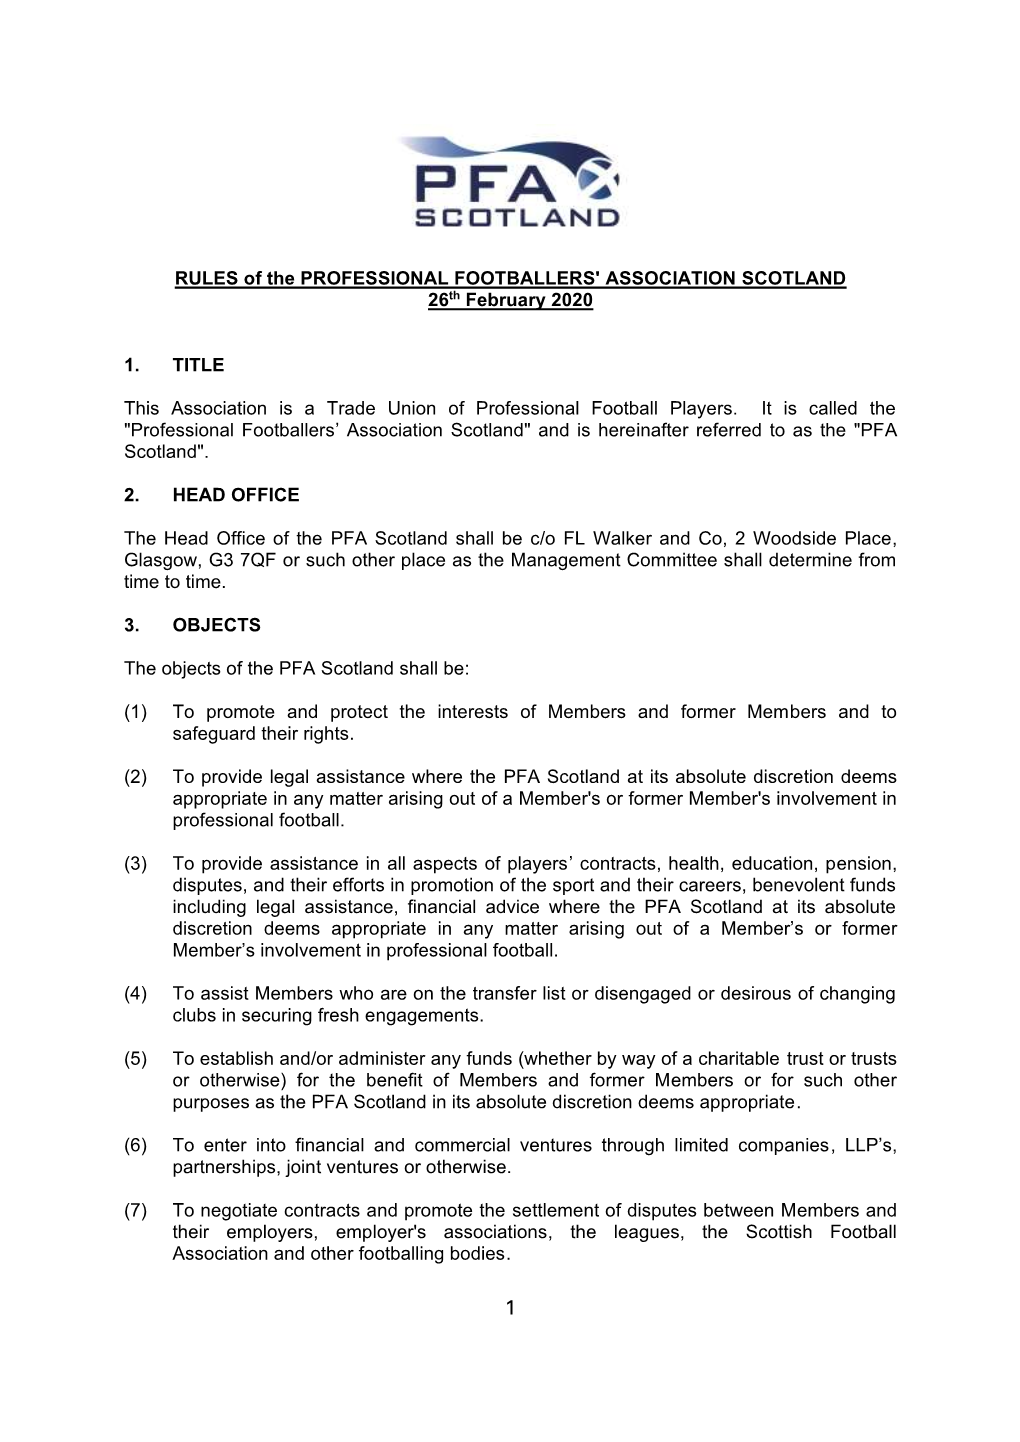 RULES of the PROFESSIONAL FOOTBALLERS' ASSOCIATION SCOTLAND 26Th February 2020